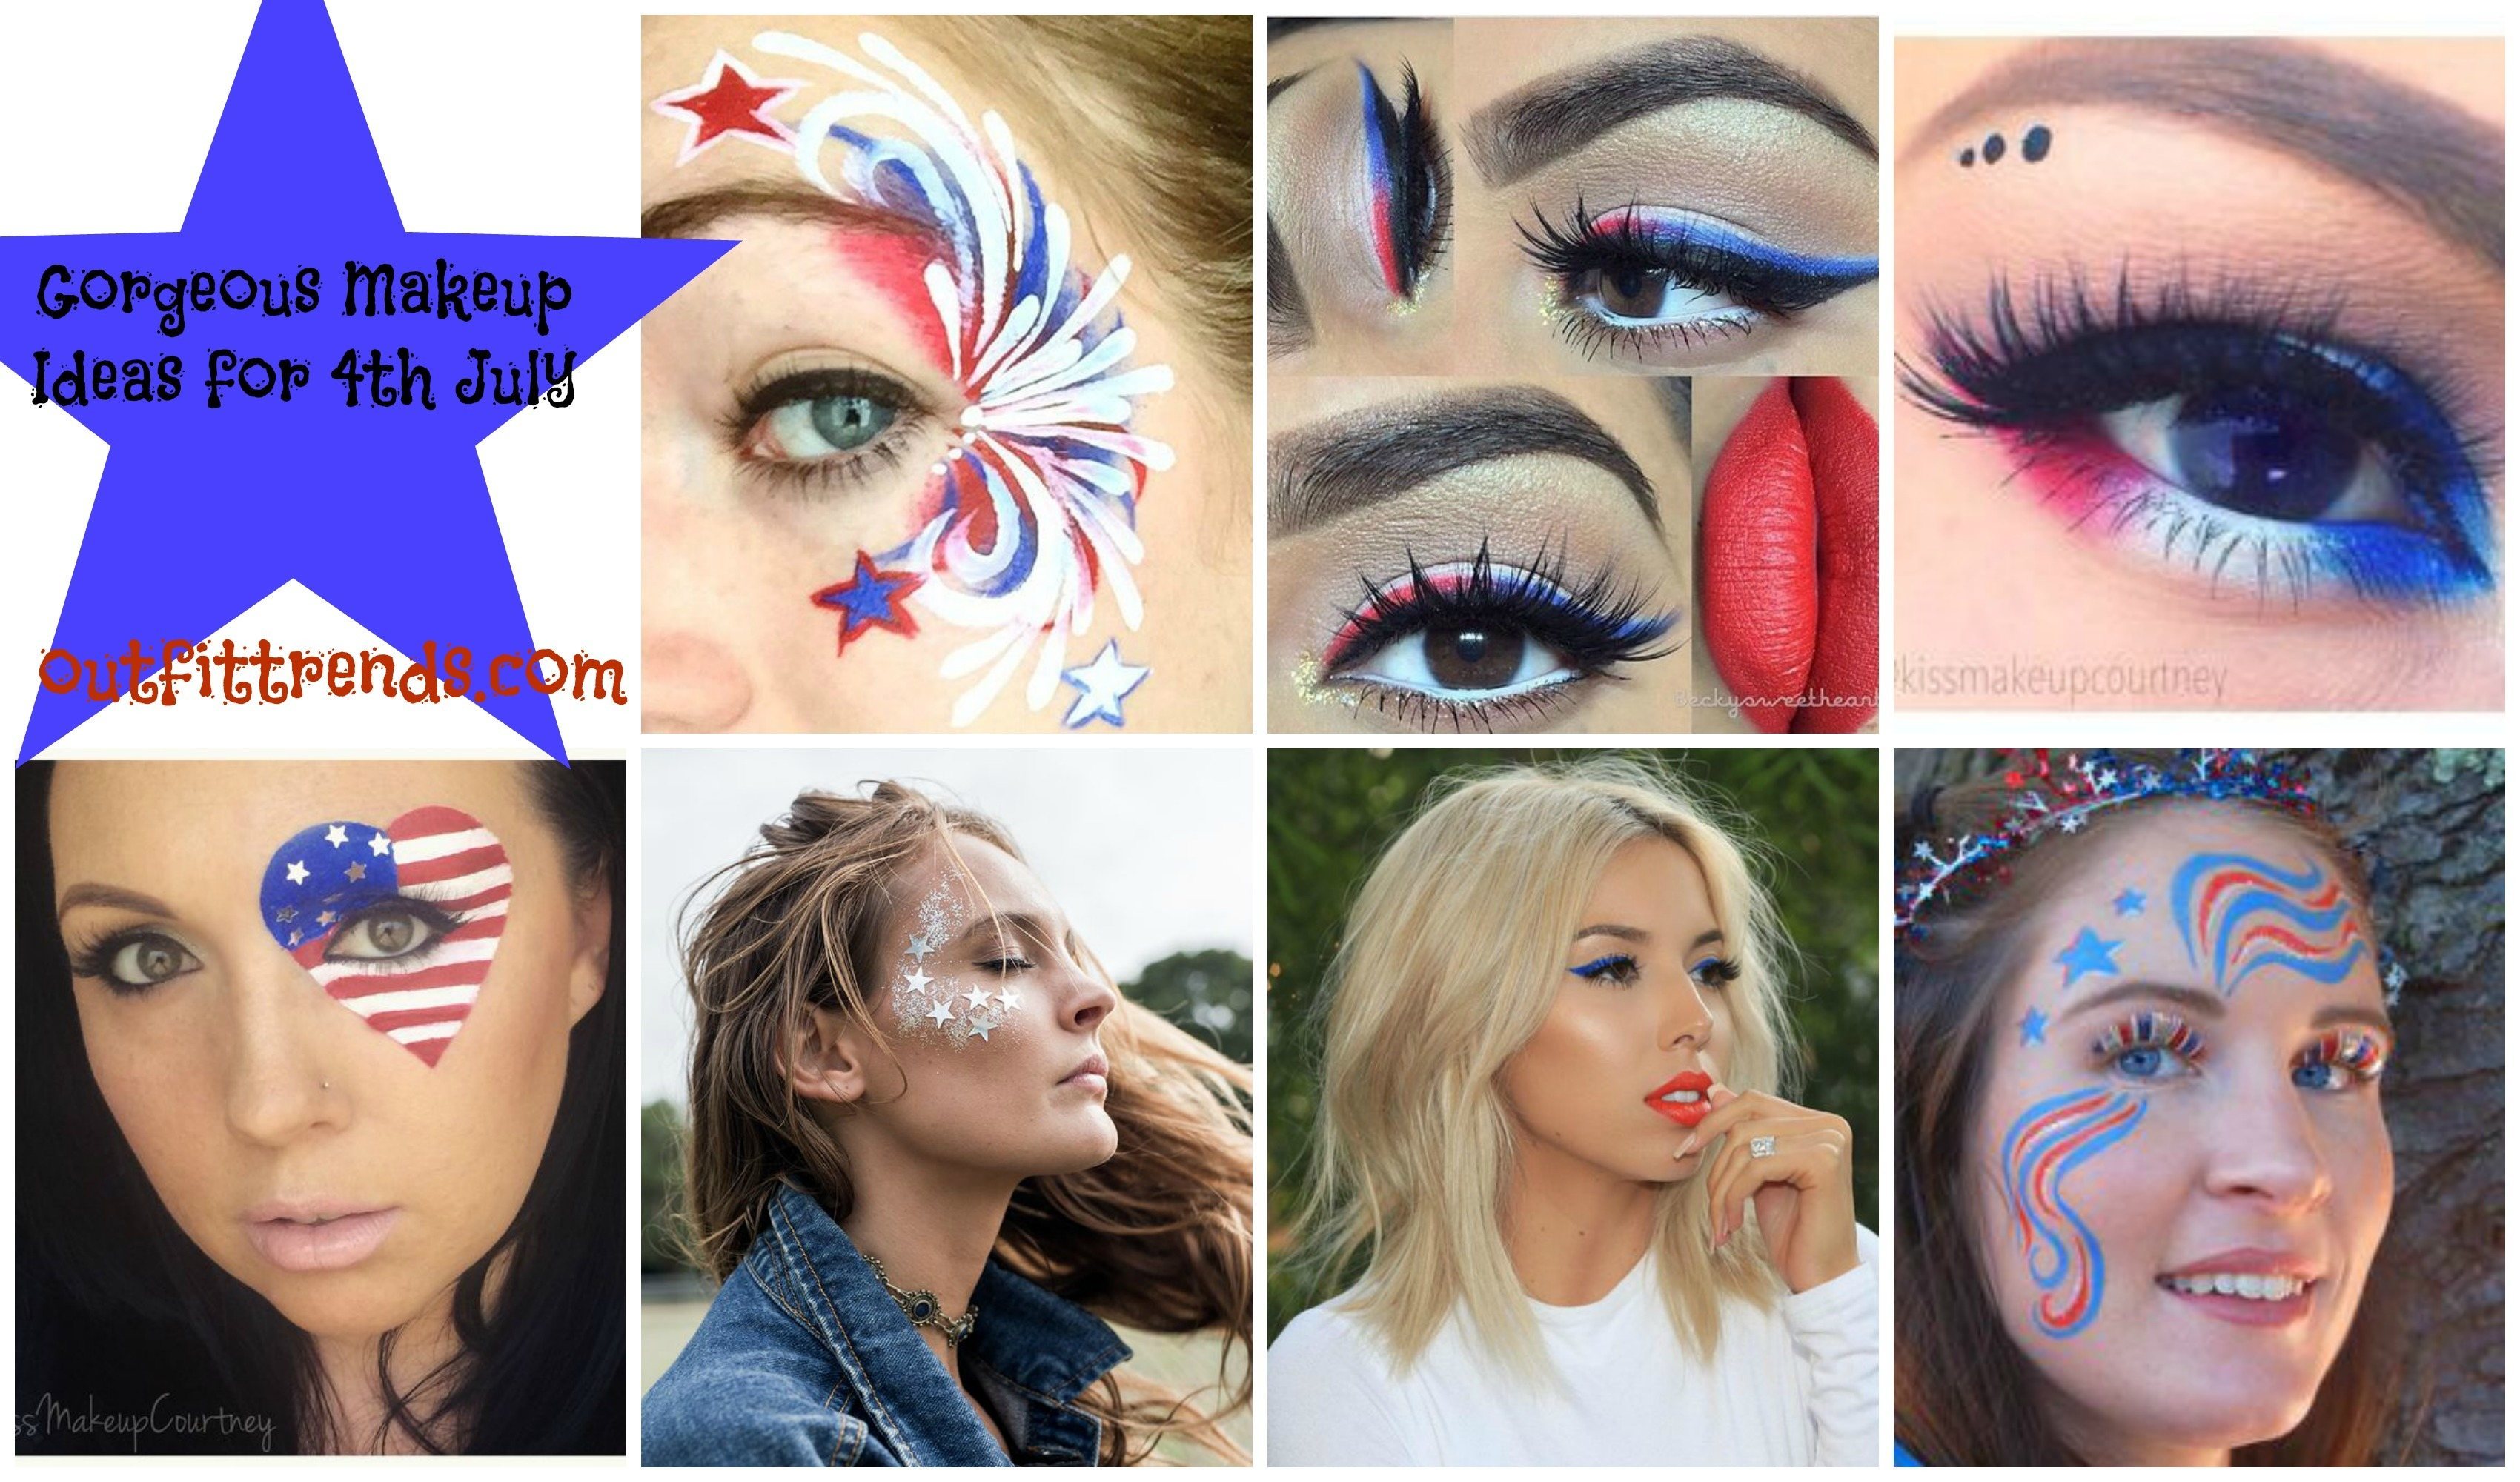 4th july makeup ideas